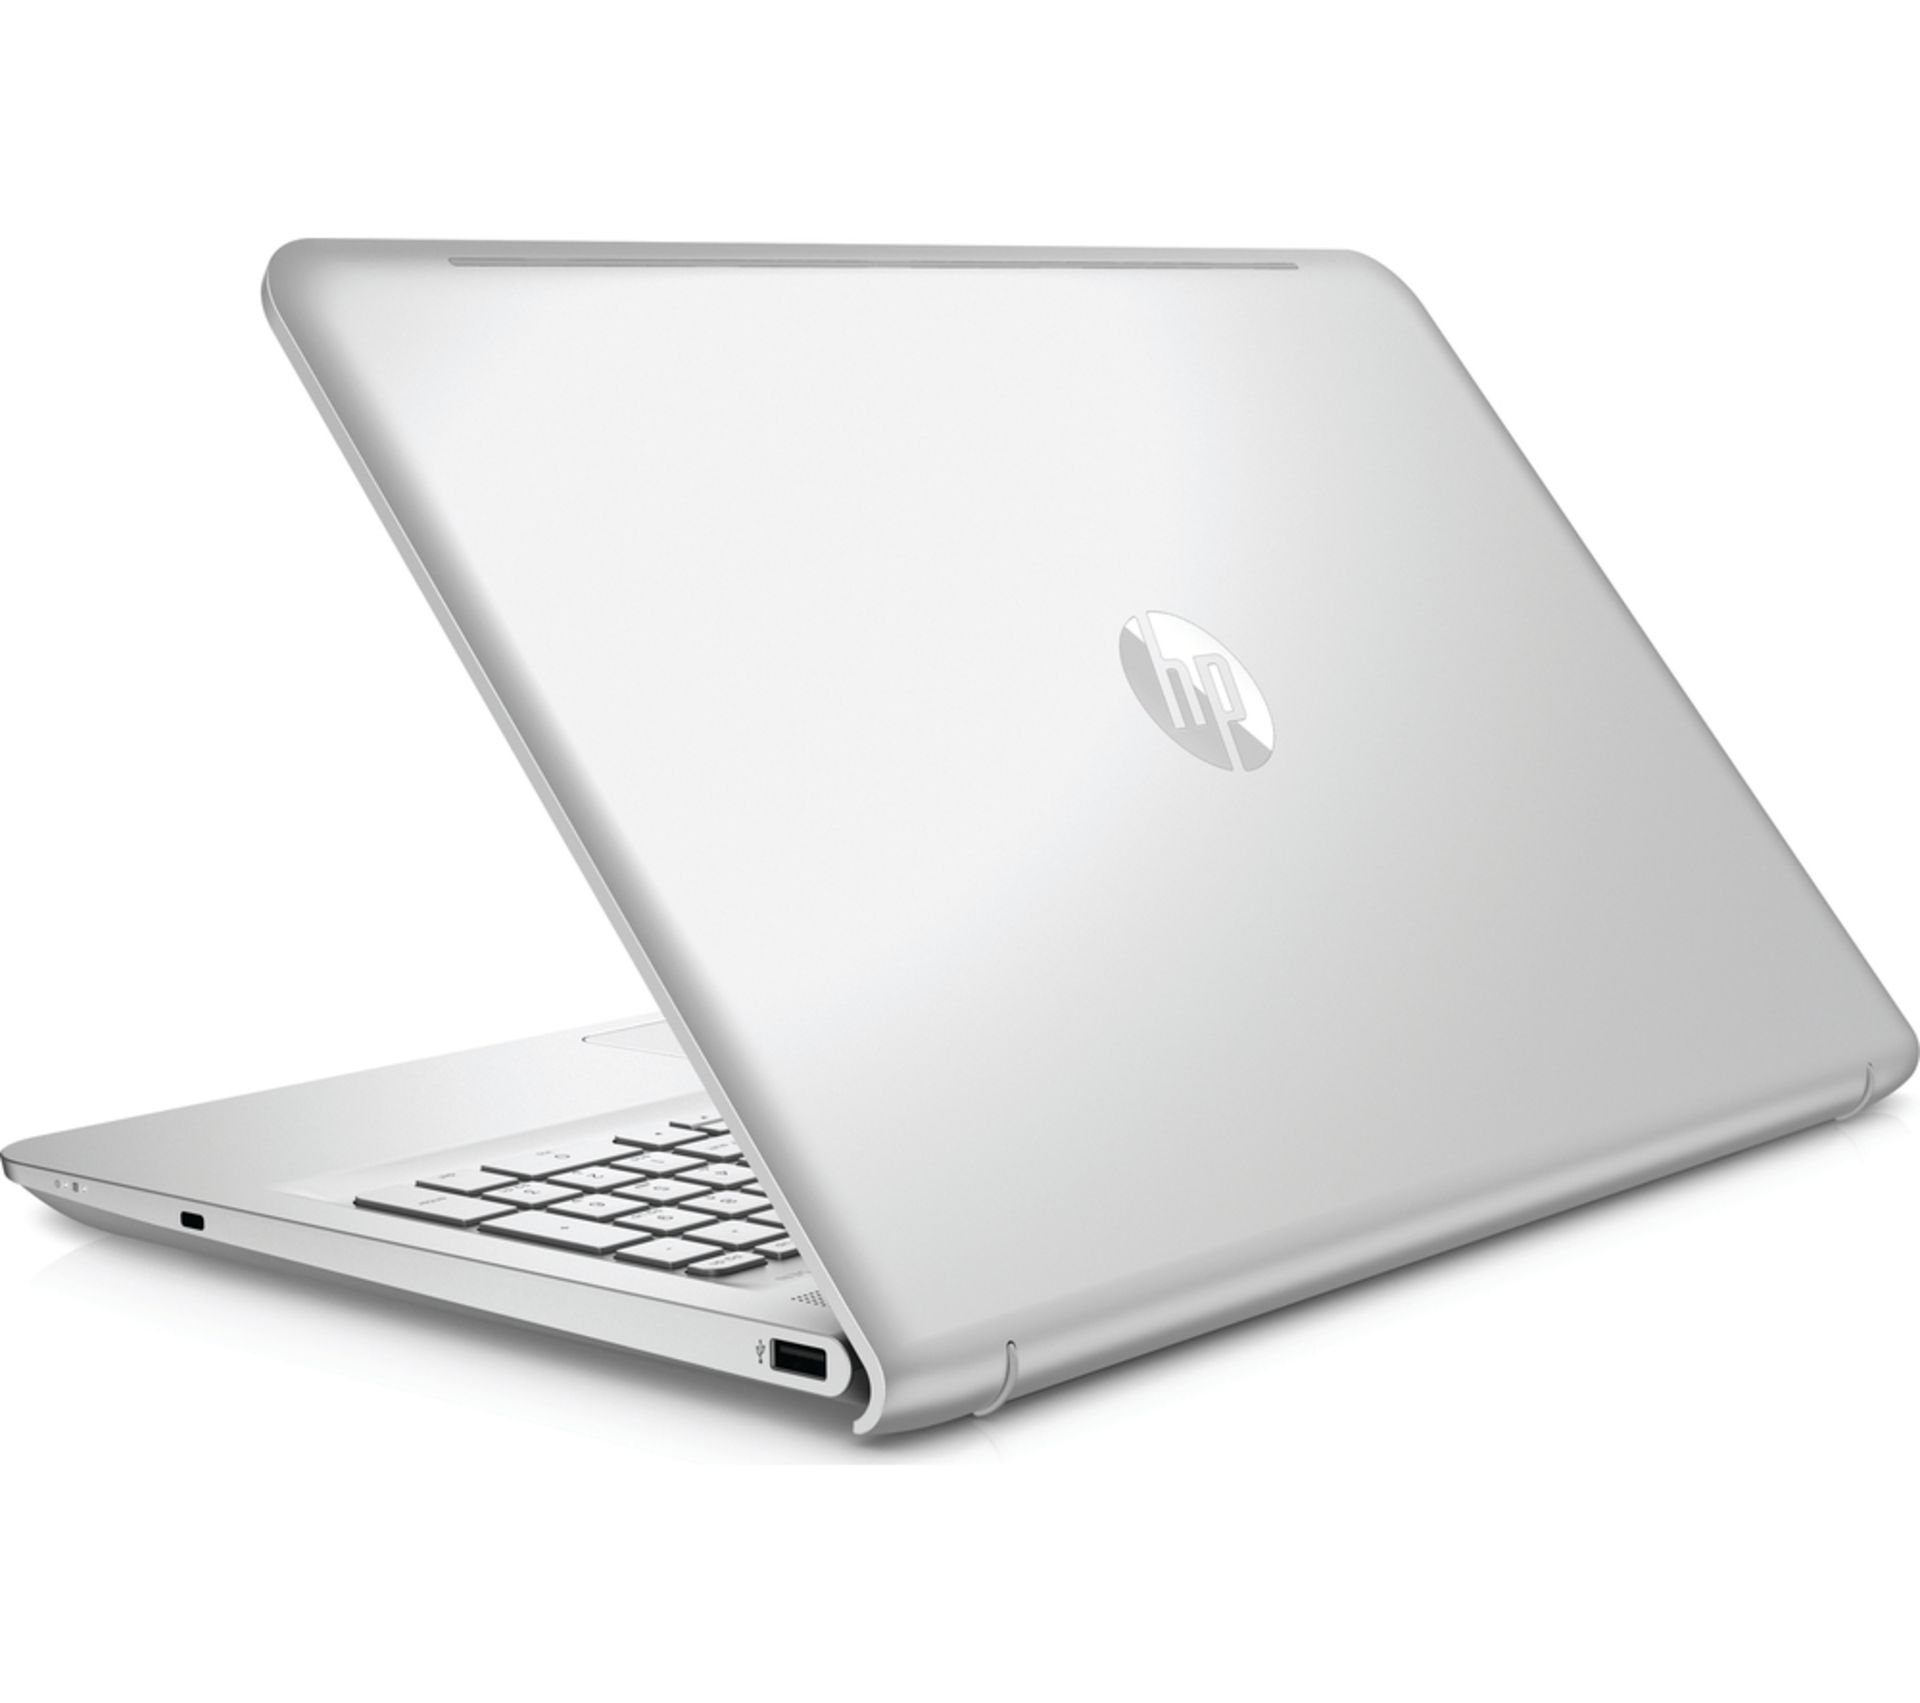 V Grade A HP Envy 15.6" Laptop With Bang & Olufsen Audio With Subwoofer - Quad Core AMD - Image 3 of 3